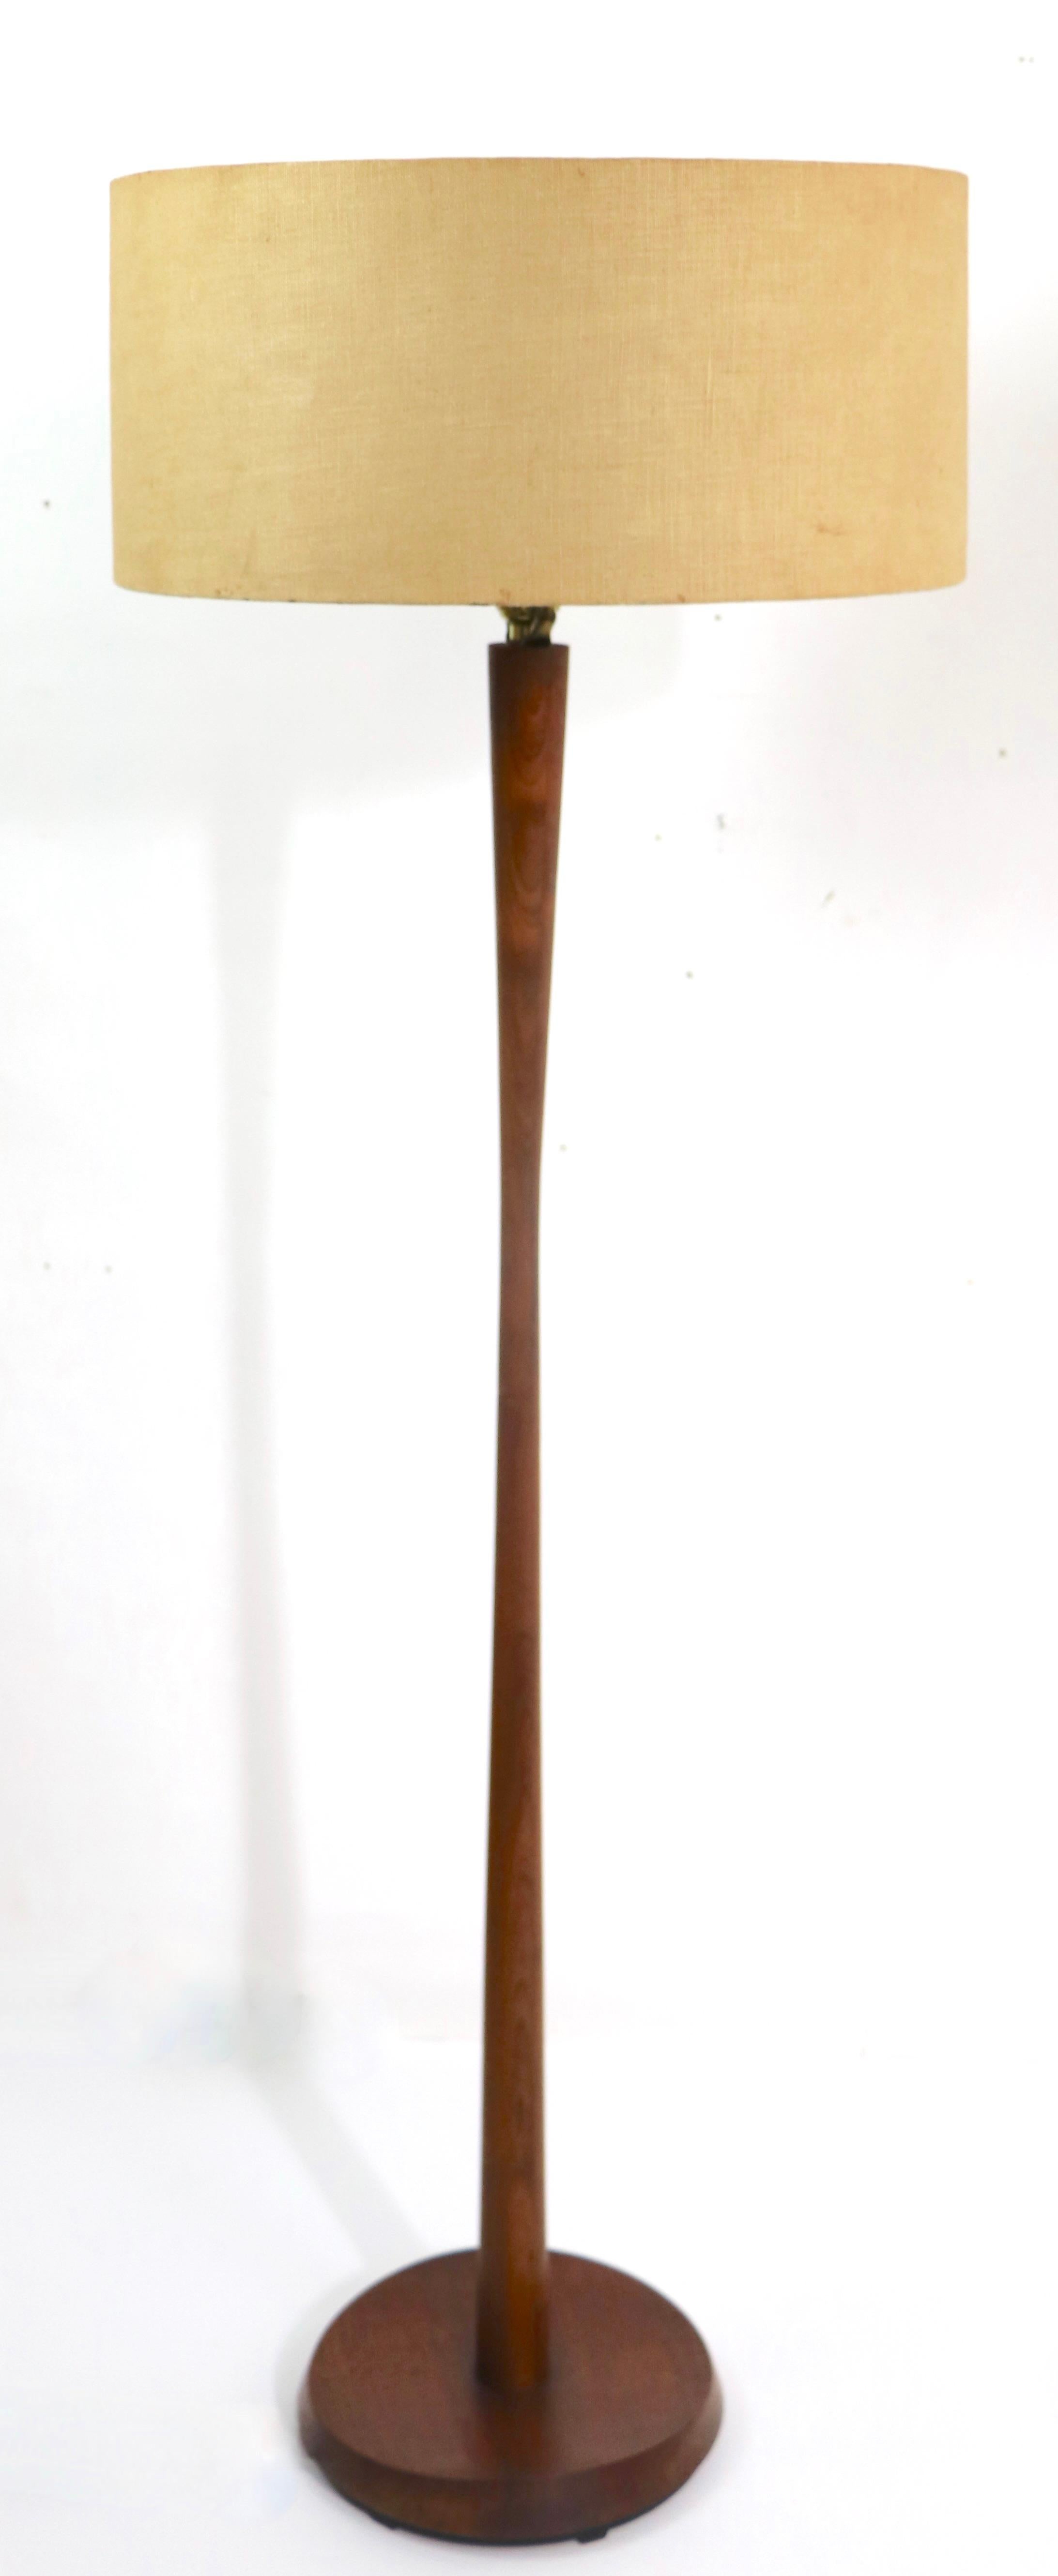 Elegant and sophisticated architectural floor lamp in solid teak, featuring an organic sculpted base, and curvaceous vertical standard. Original, clean and working condition, shade not included.
Measures: total H 53 x H to top of wood pole 43 inch.